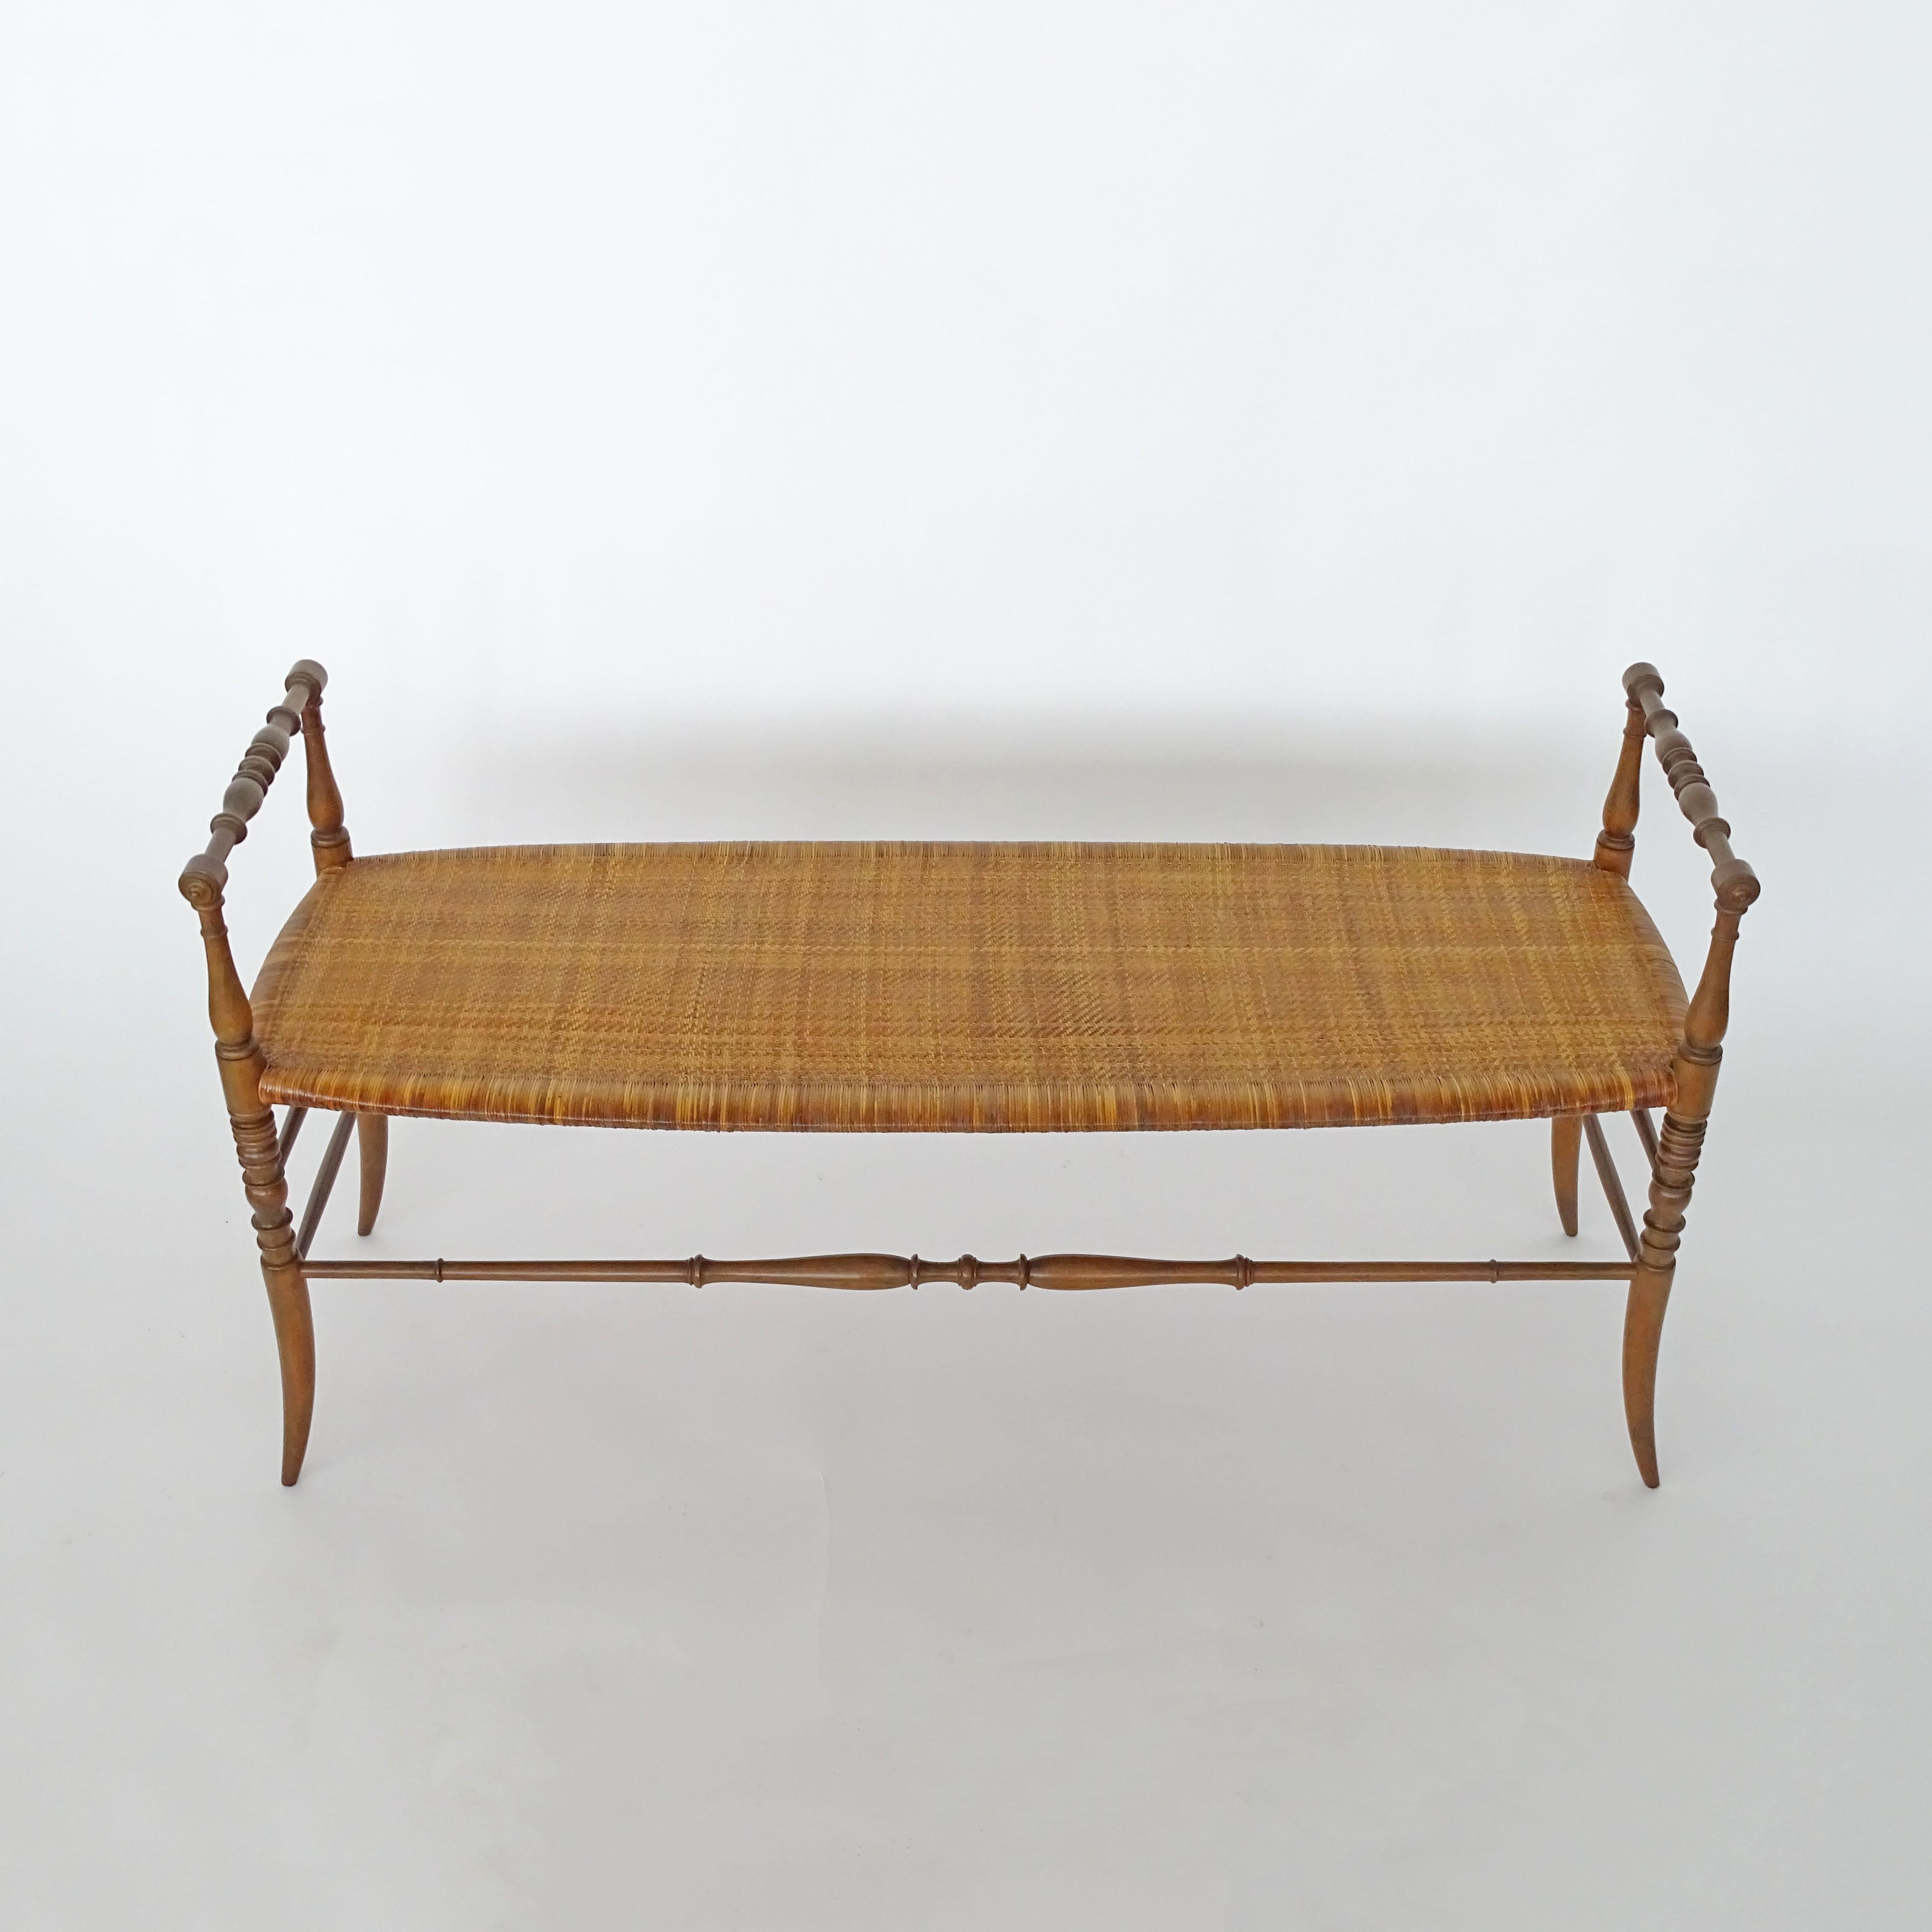 Chiavarina Bench in wood and the original cane seat, Italy 1950s
Probably by Sanguinetti Chiavari.